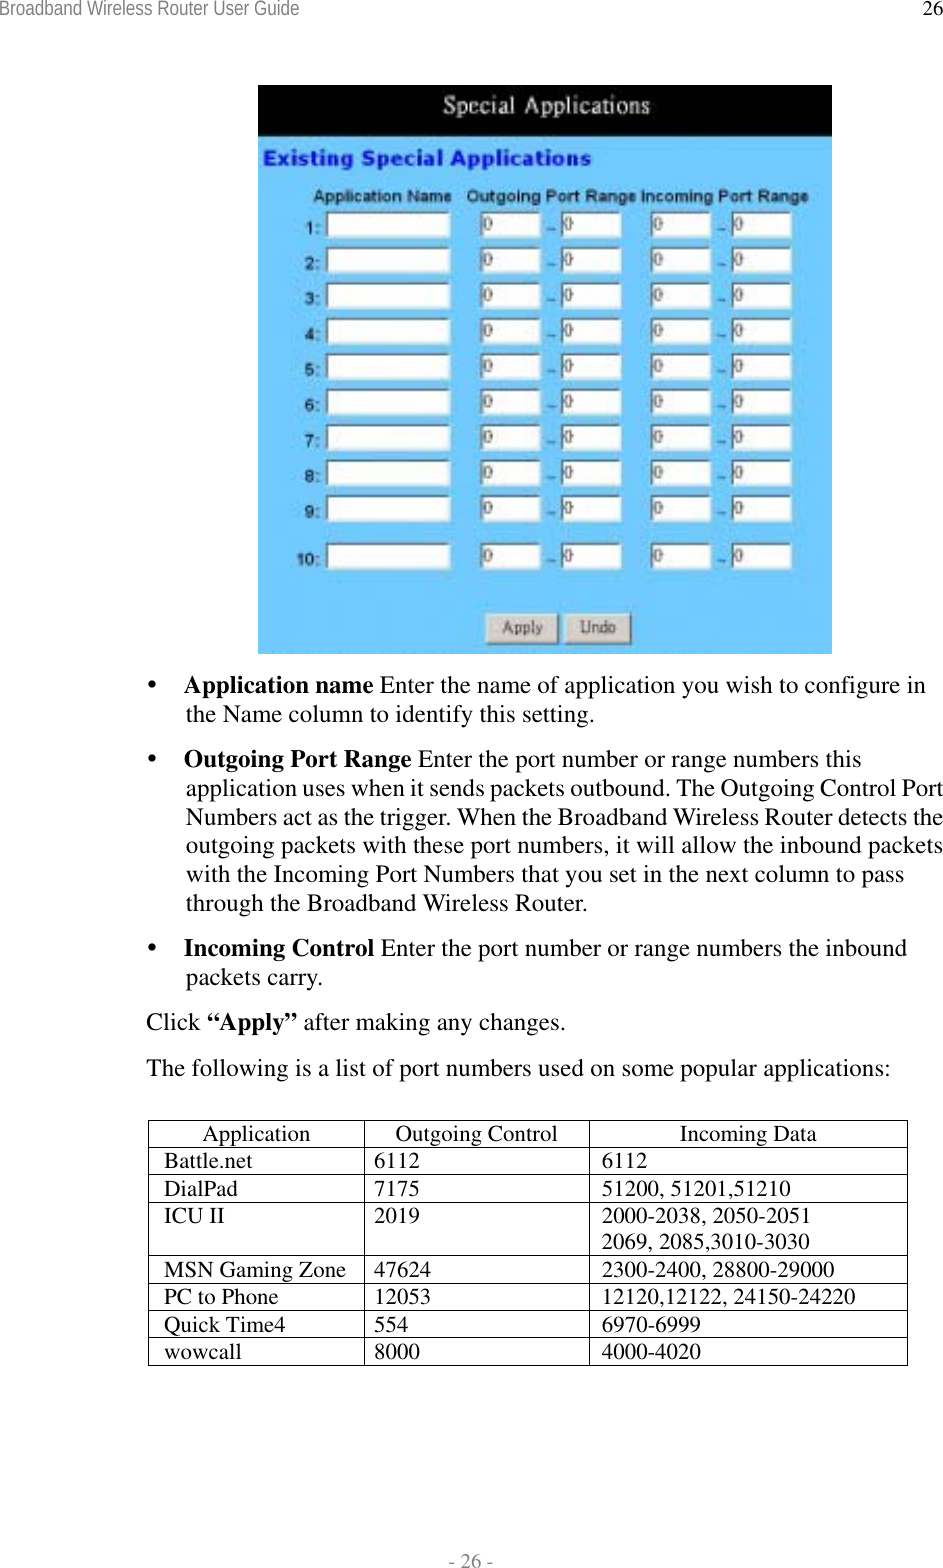 Broadband Wireless Router User Guide  - 26 - 26  Application name Enter the name of application you wish to configure in the Name column to identify this setting.  Outgoing Port Range Enter the port number or range numbers this application uses when it sends packets outbound. The Outgoing Control Port Numbers act as the trigger. When the Broadband Wireless Router detects the outgoing packets with these port numbers, it will allow the inbound packets with the Incoming Port Numbers that you set in the next column to pass through the Broadband Wireless Router.   Incoming Control Enter the port number or range numbers the inbound packets carry. Click “Apply” after making any changes. The following is a list of port numbers used on some popular applications:  Application  Outgoing Control  Incoming Data Battle.net 6112  6112 DialPad   7175  51200, 51201,51210 ICU II  2019  2000-2038, 2050-2051 2069, 2085,3010-3030 MSN Gaming Zone  47624  2300-2400, 28800-29000 PC to Phone  12053  12120,12122, 24150-24220 Quick Time4  554  6970-6999 wowcall 8000  4000-4020  